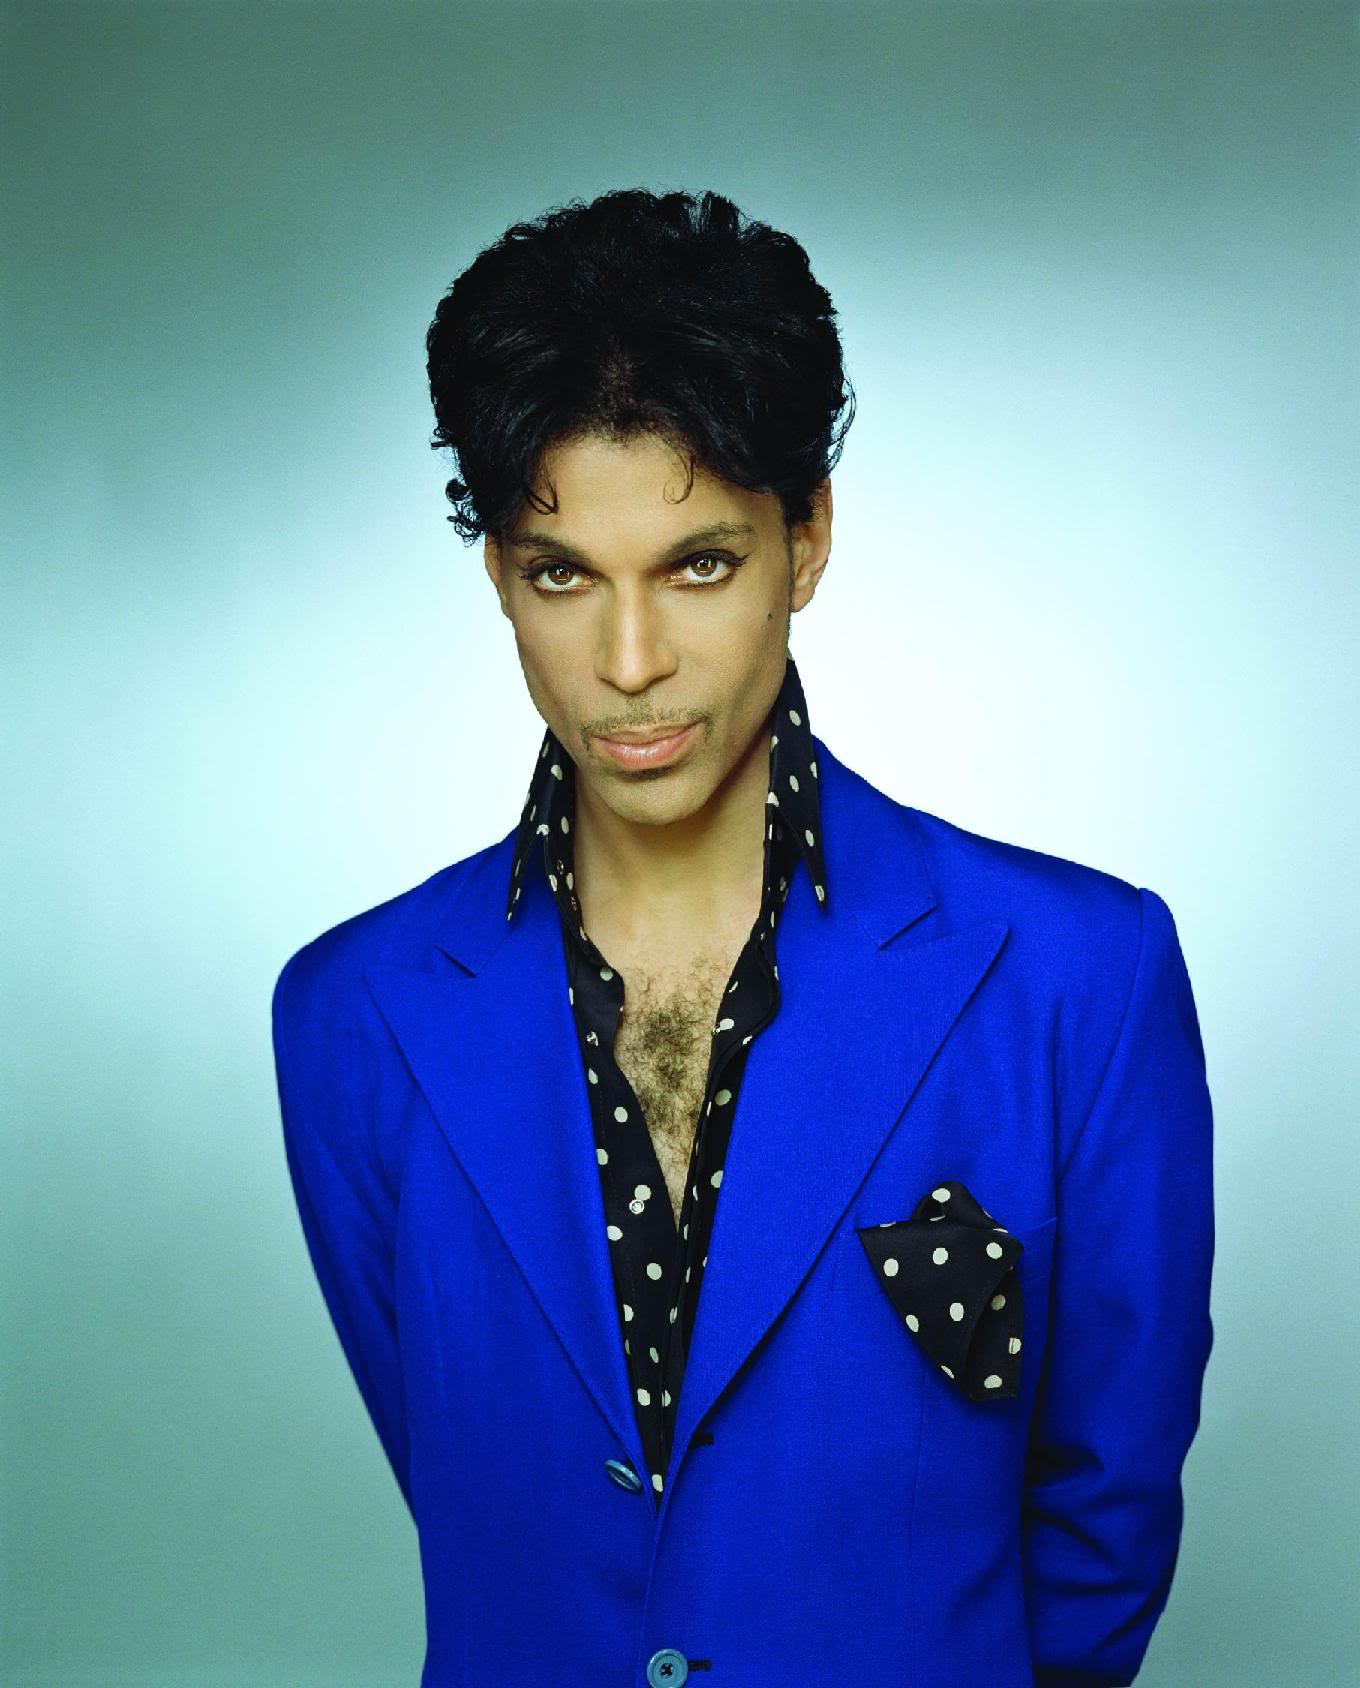 Legendary Musician Prince has Died at age 57